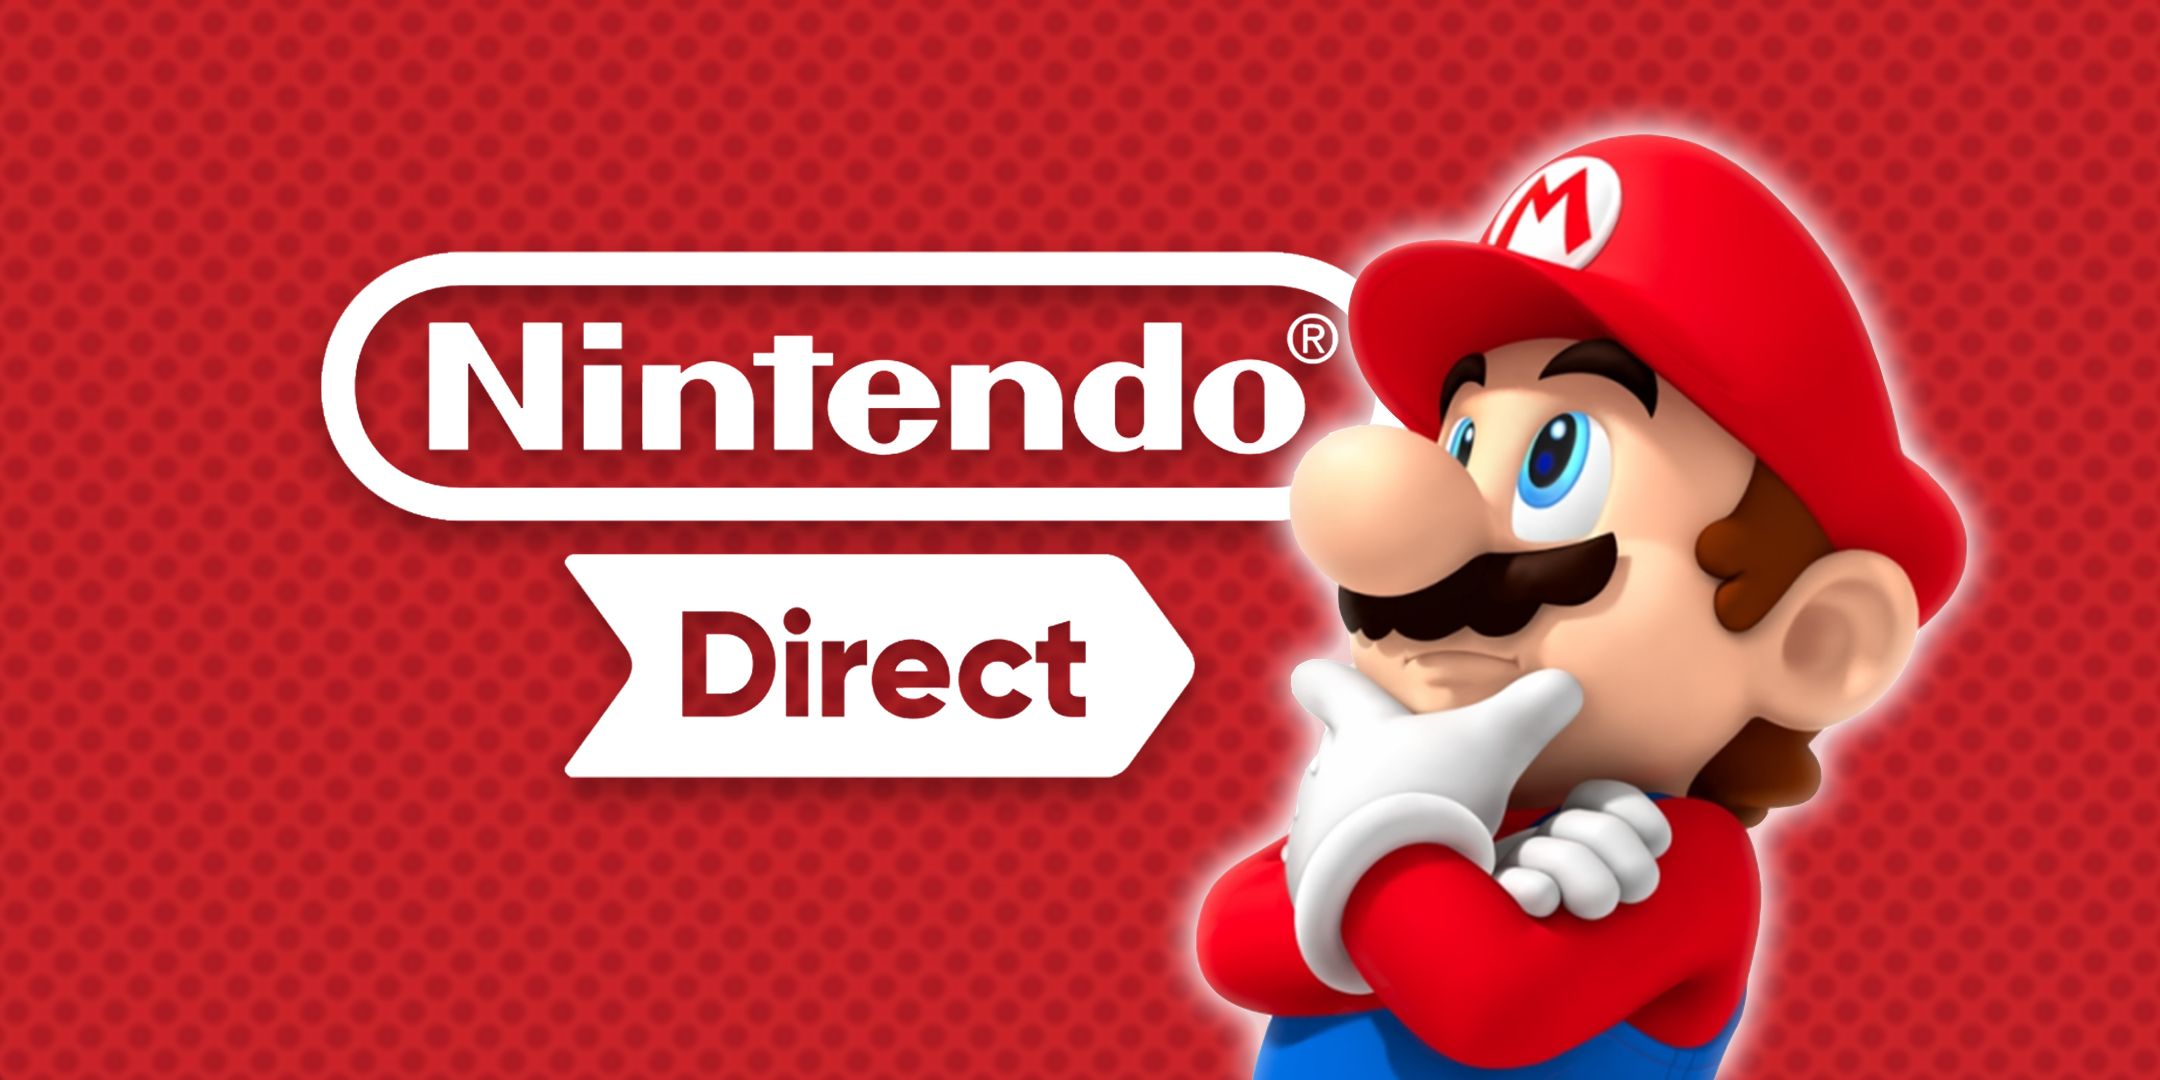 Mario Thinking next to the Nintendo Direct Logo on a red background.